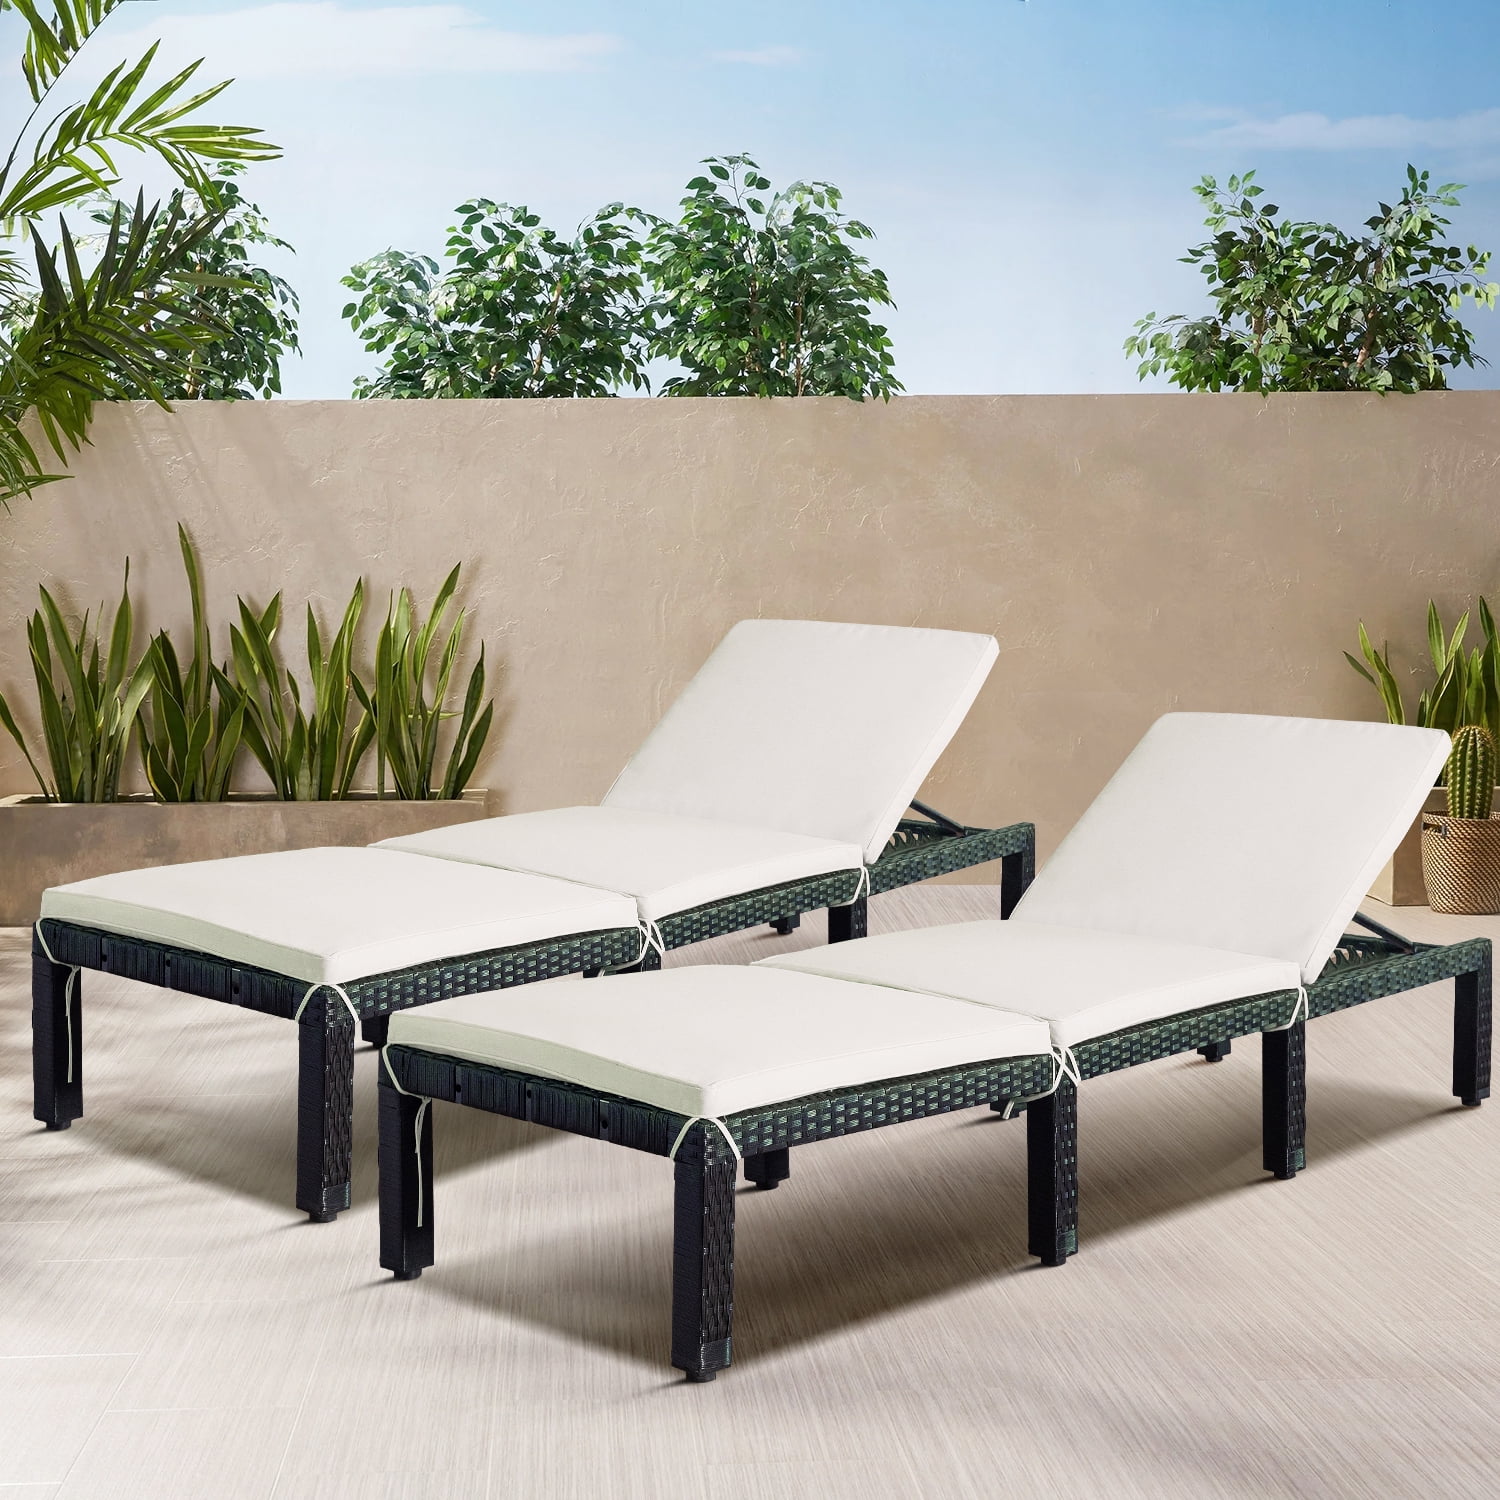 Set of 2 Outdoor Patio Adjustable Pool Recliner Chaise Lounge Chairs Furniture 